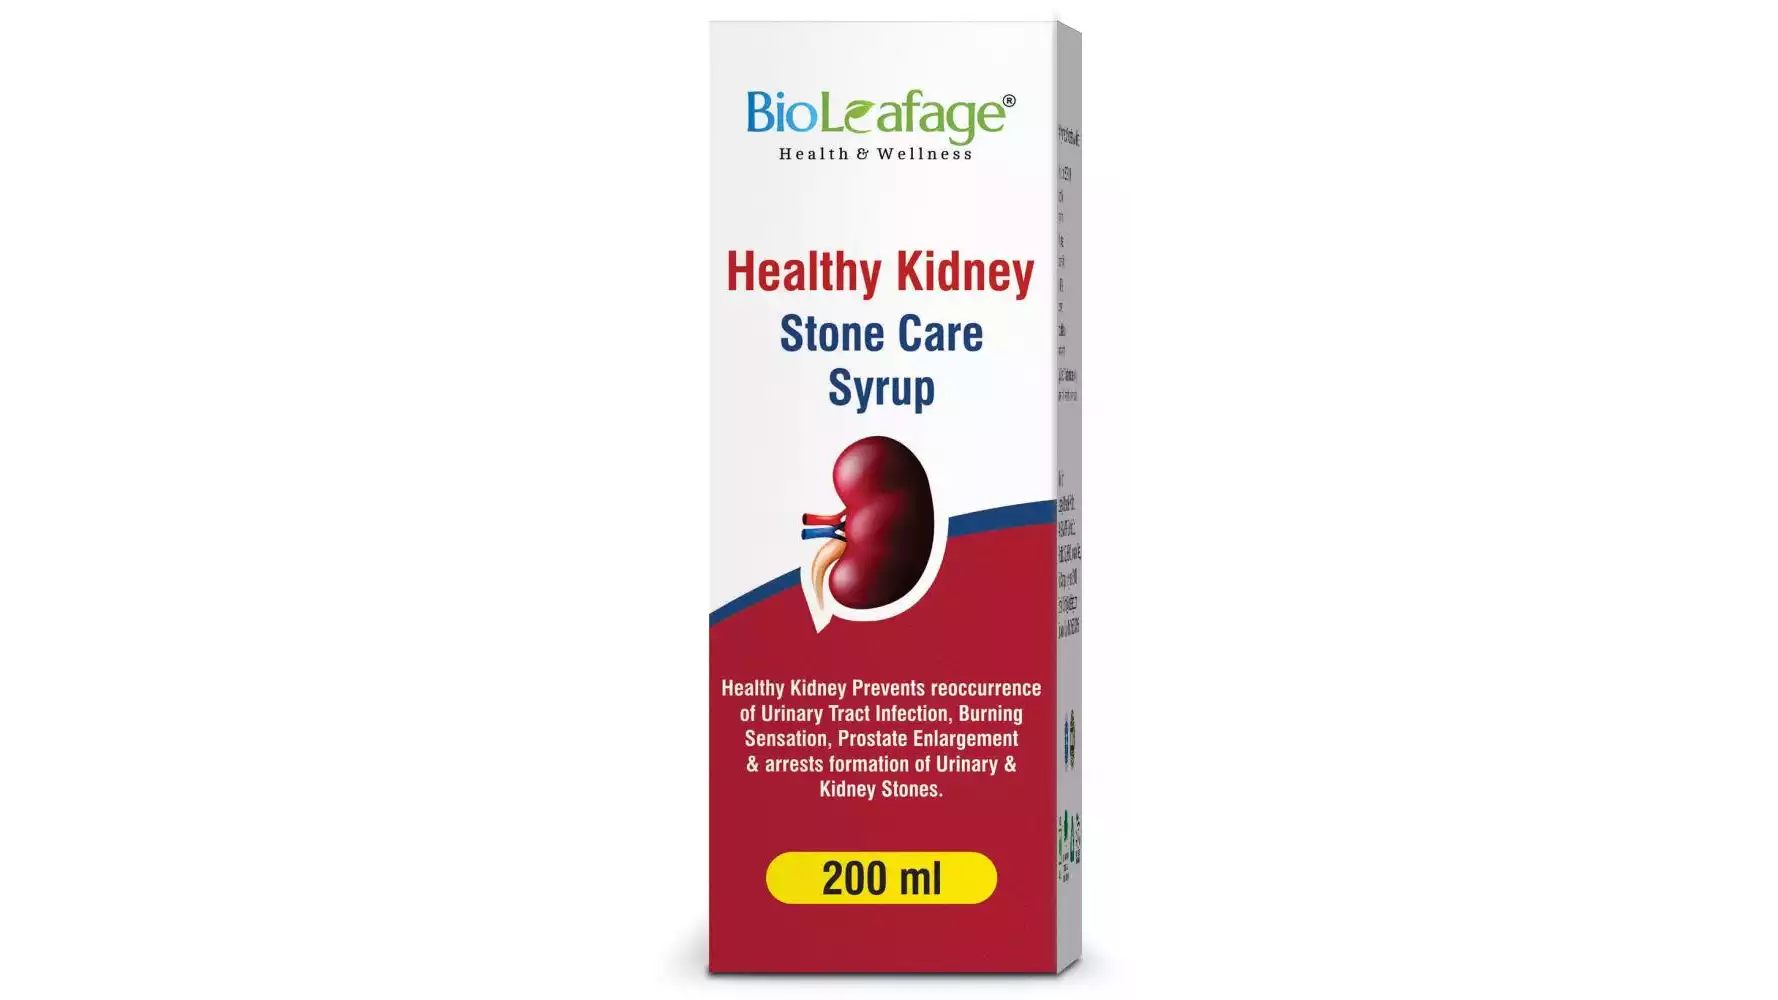 Bioleafage Healthy Kidney Stone Care Syrup (200ml)